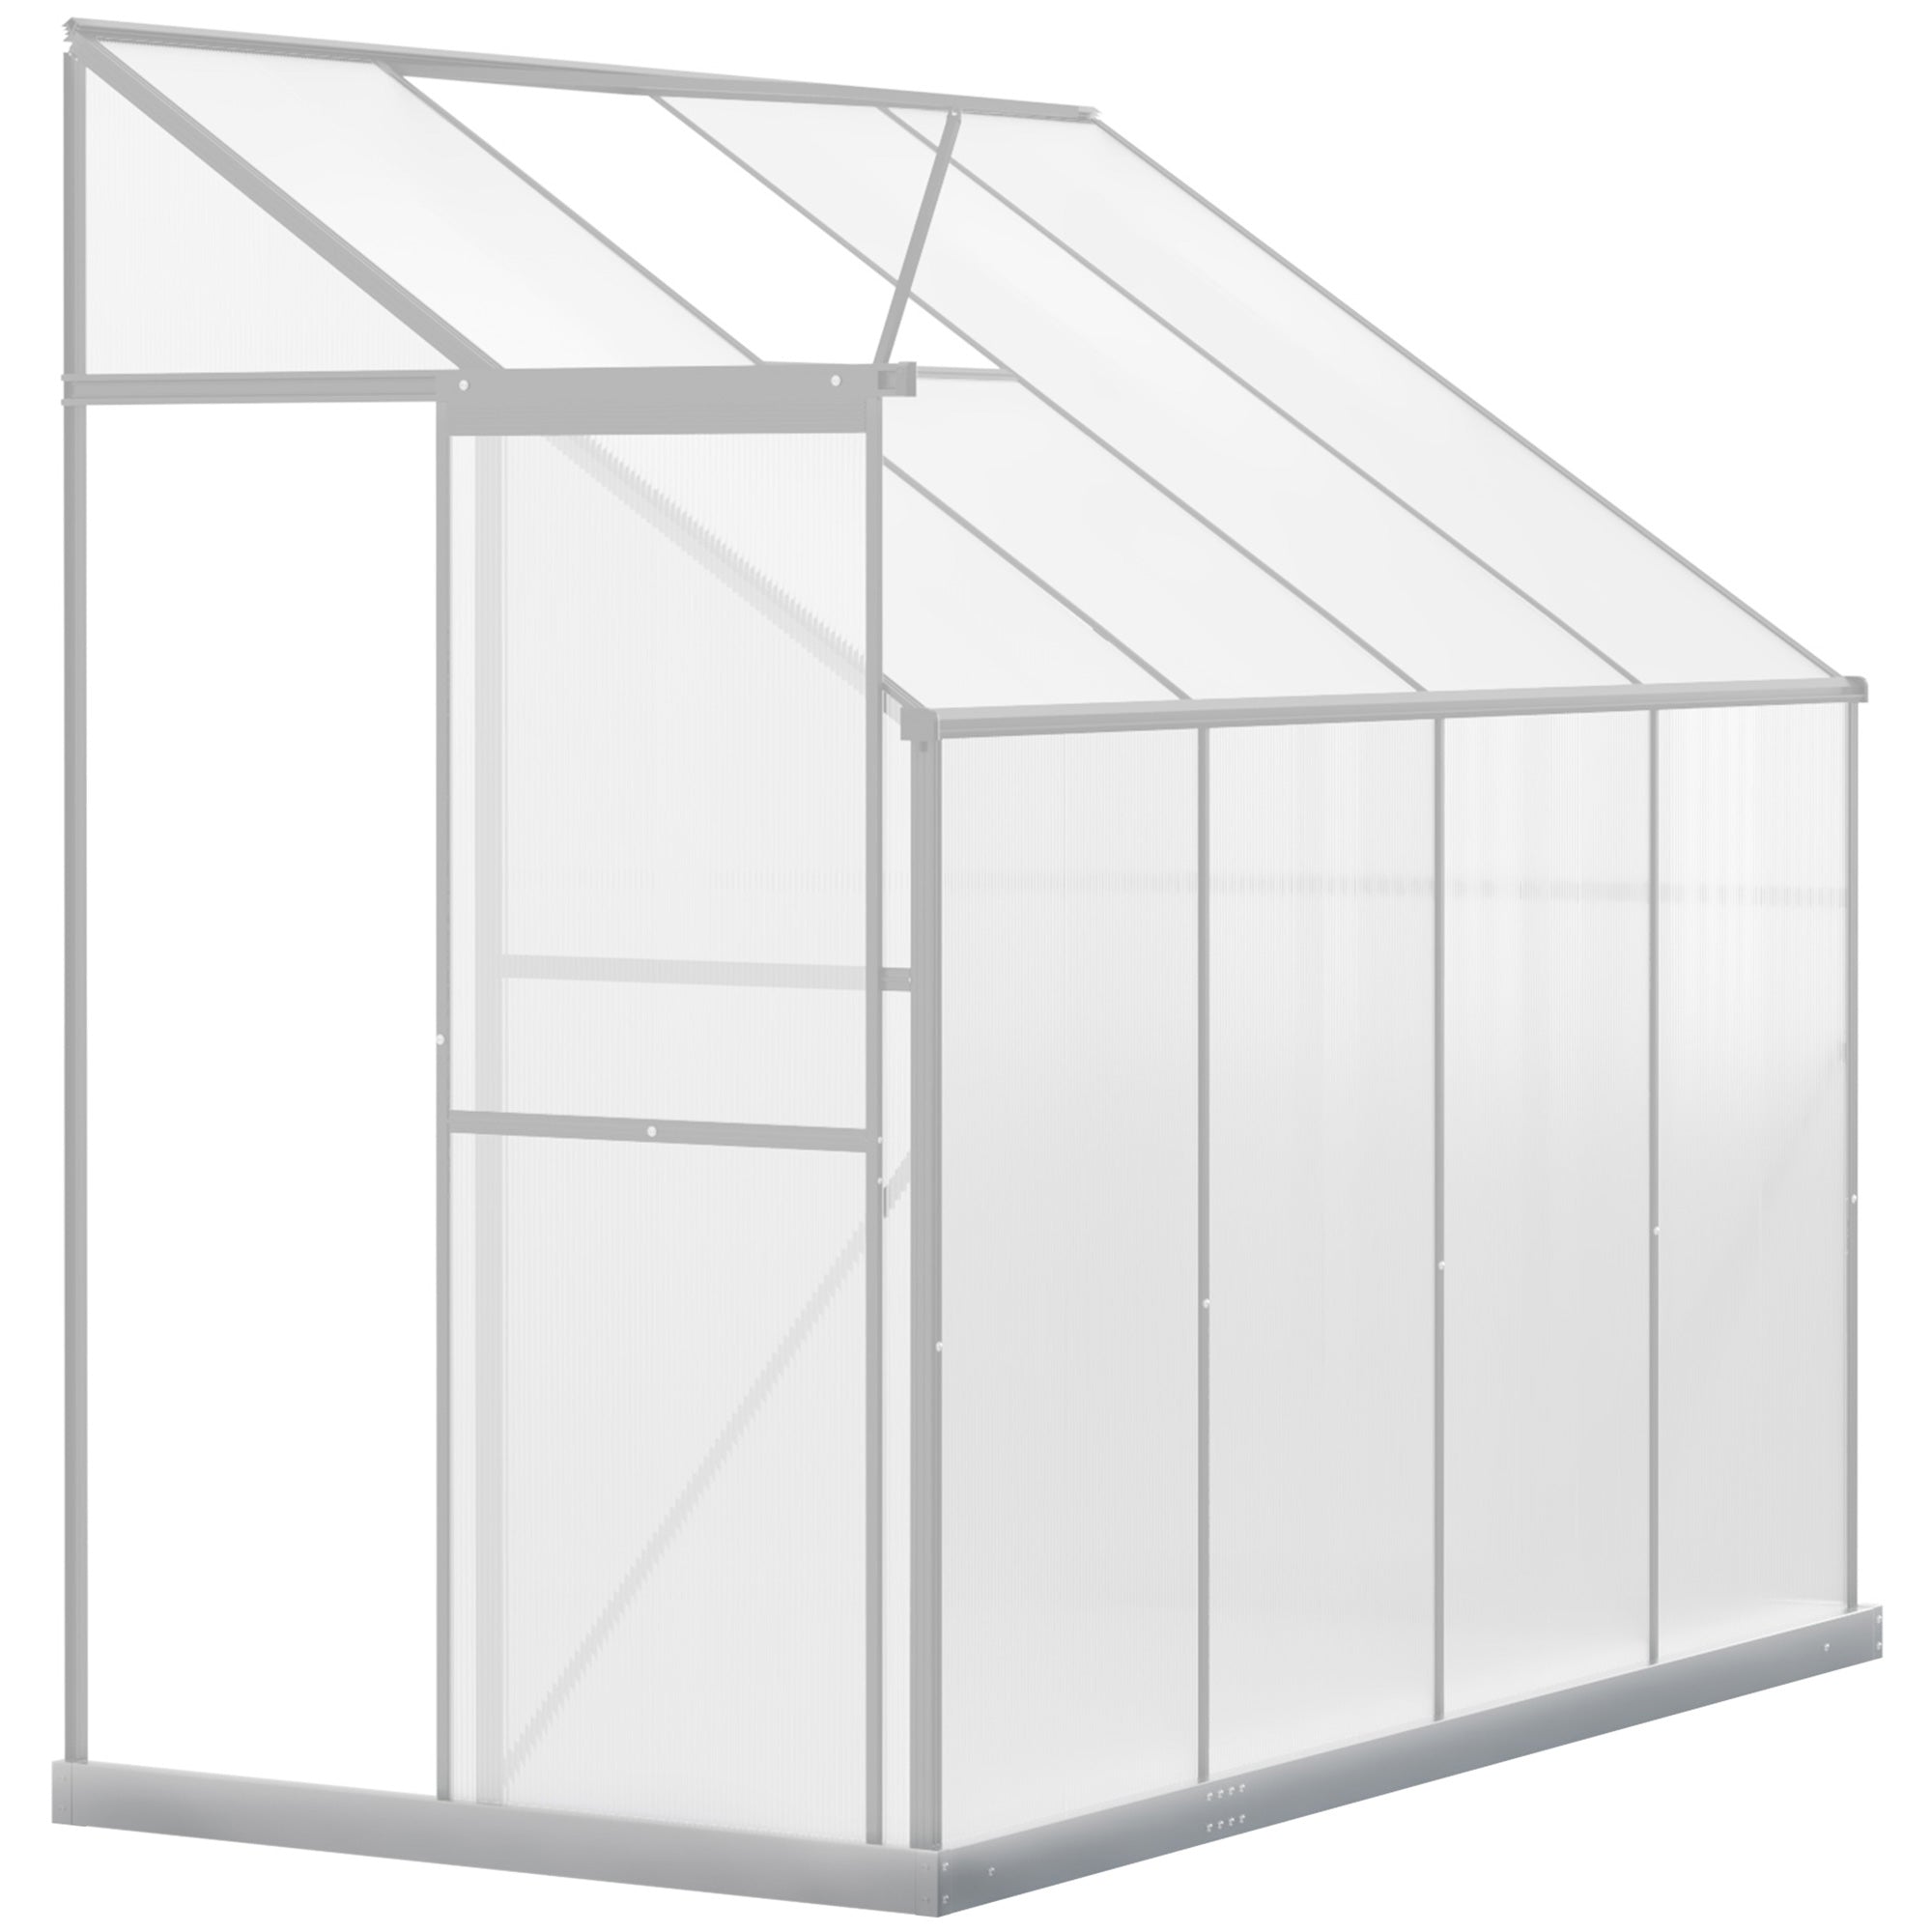 Outsunny 8.3FT X 4FT Walk-In Garden Greenhouse Aluminum Frame Polycarbonate  | TJ Hughes